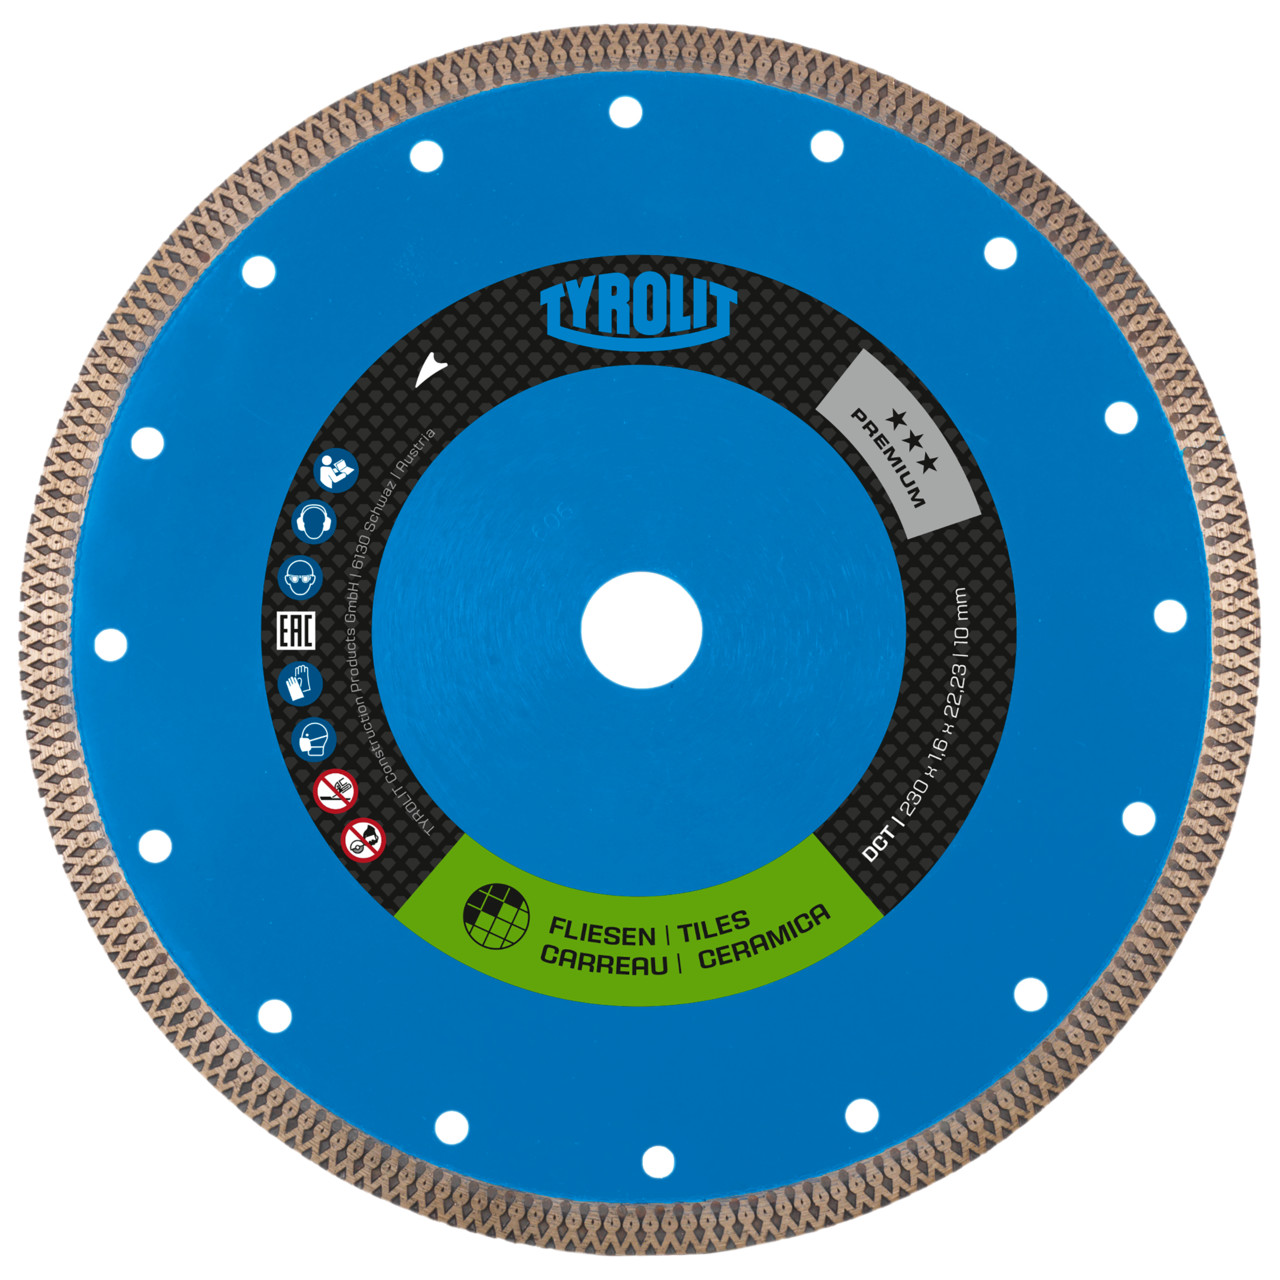 TYROLIT dry cutting saw blades DxDxH 115x1.2x22.23 DCT, shape: 1A1R (cut-off wheel with continuous cutting wheel), Art. 639559